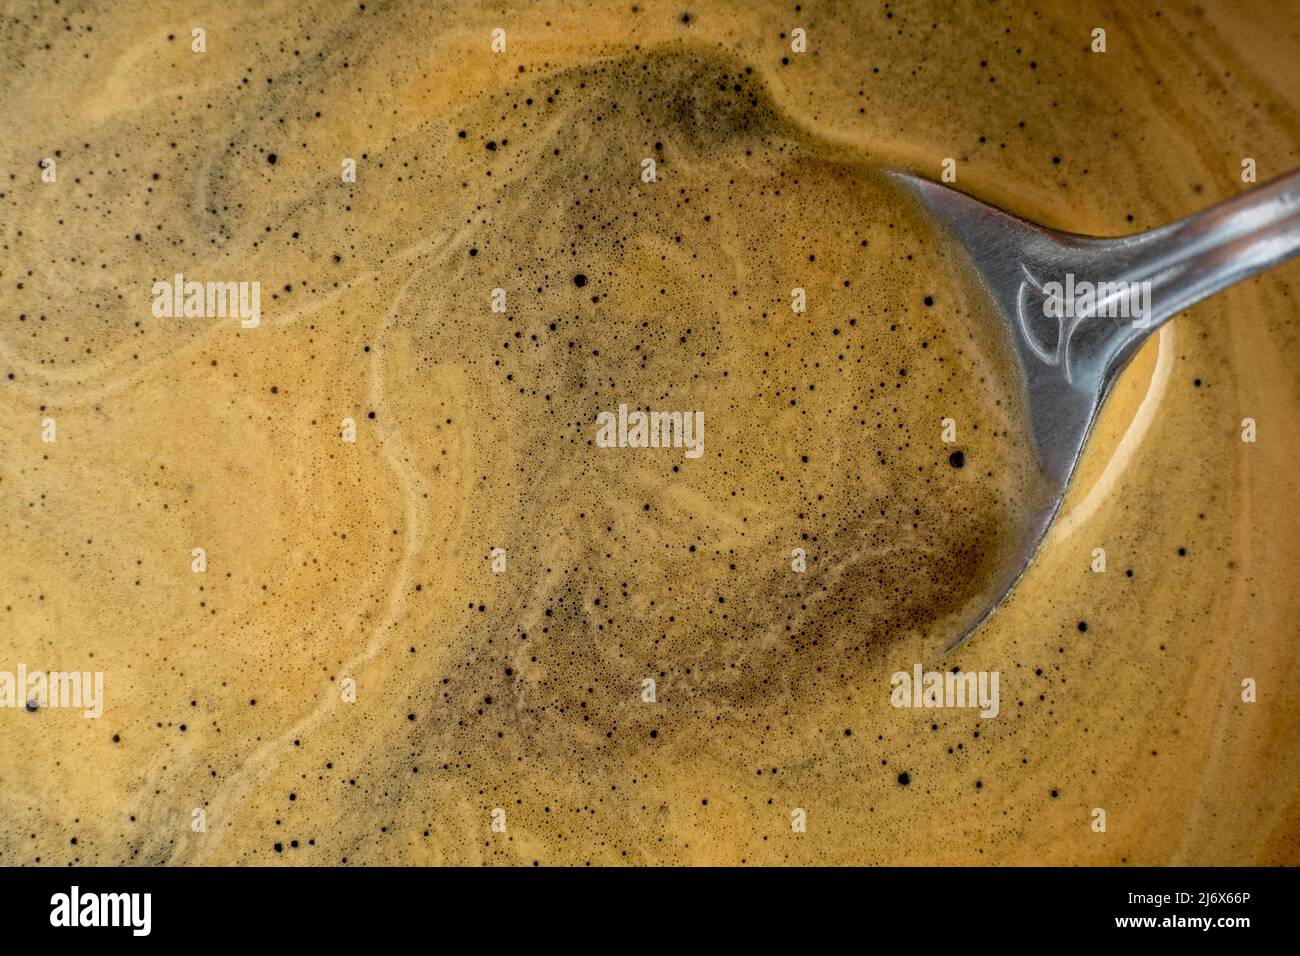 Coffee texture background. Strong espresso extreme dark coffee brown froth closeup Stock Photo